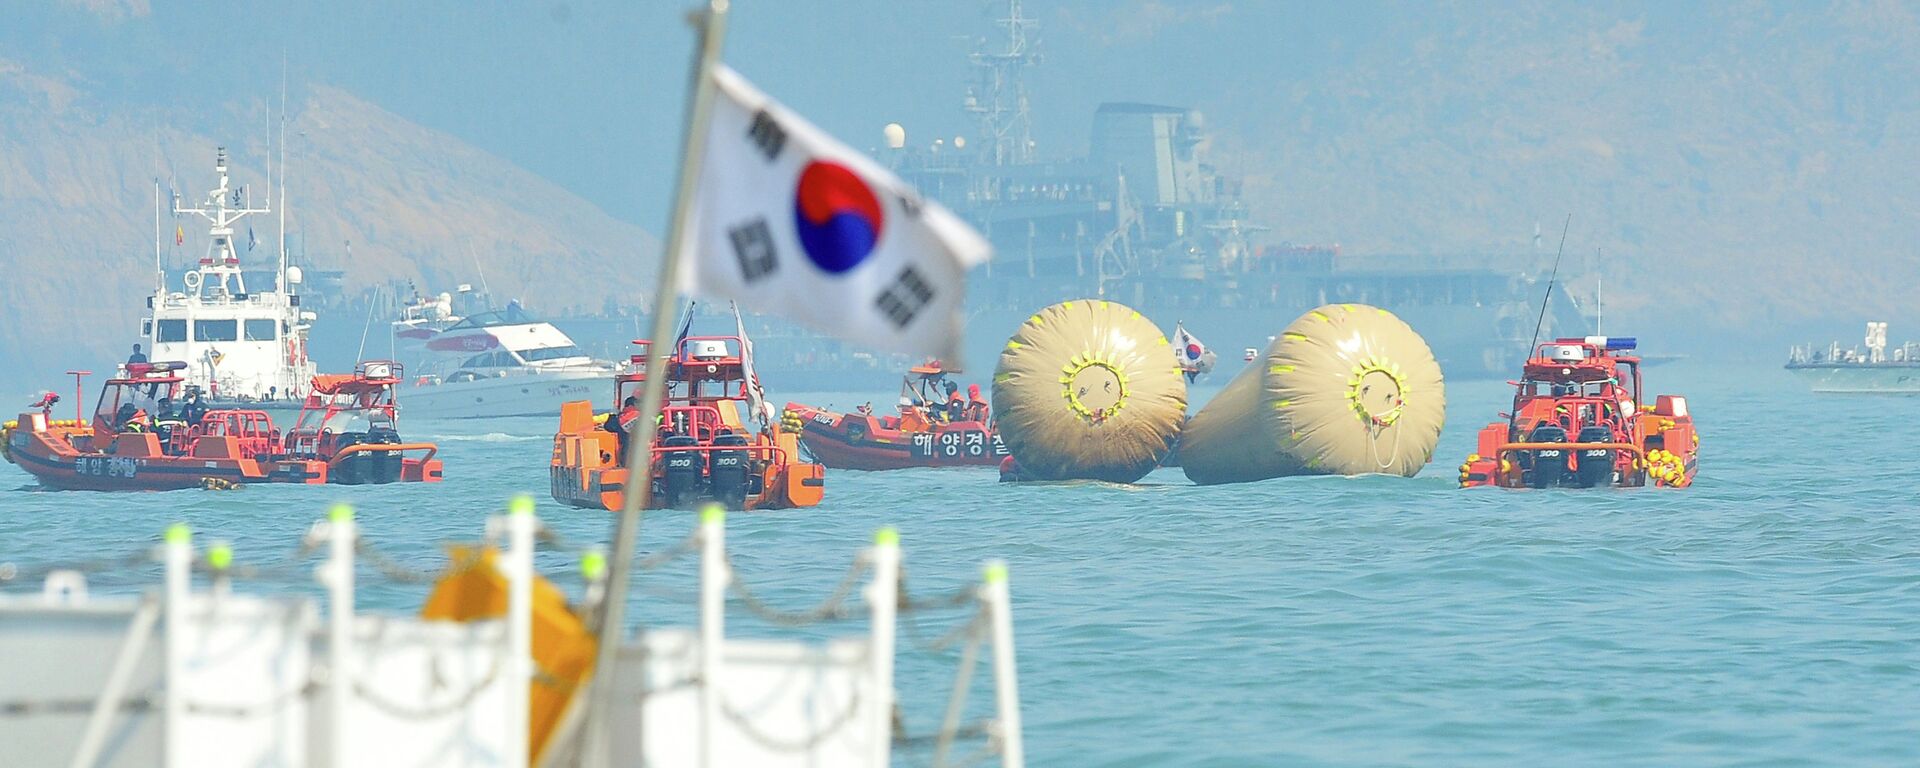 South Korean rescue teams take part in recovery operations at the site of the sunken 'Sewol' ferry, marked with buoys, off the coast of the South Korean island of Jindo - Sputnik Türkiye, 1920, 13.06.2016